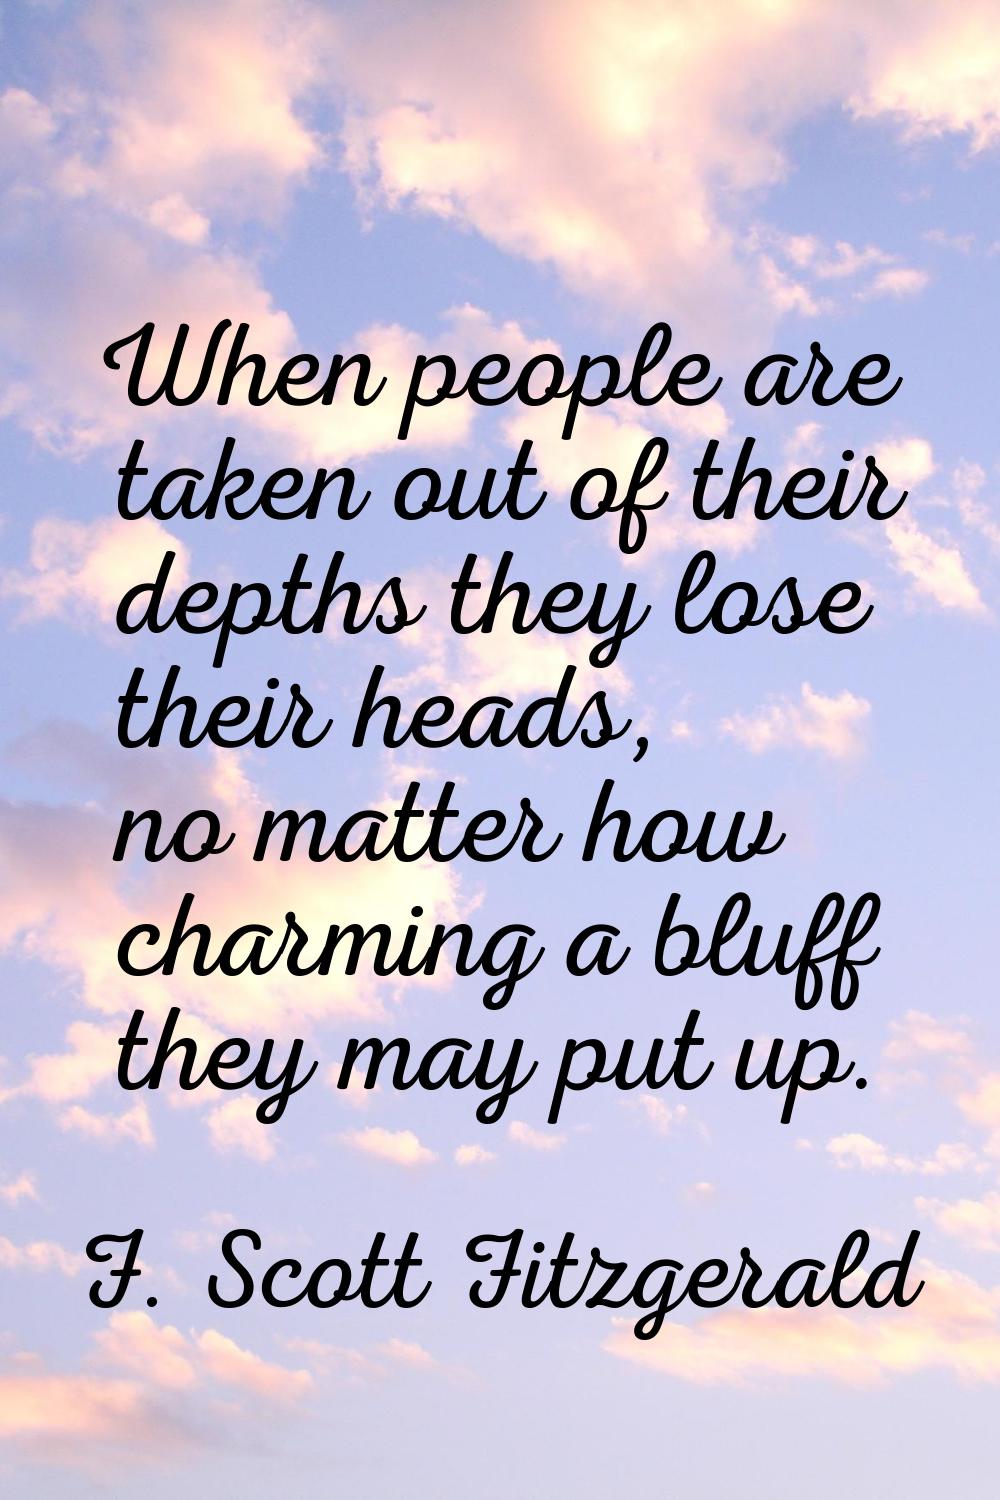 When people are taken out of their depths they lose their heads, no matter how charming a bluff the